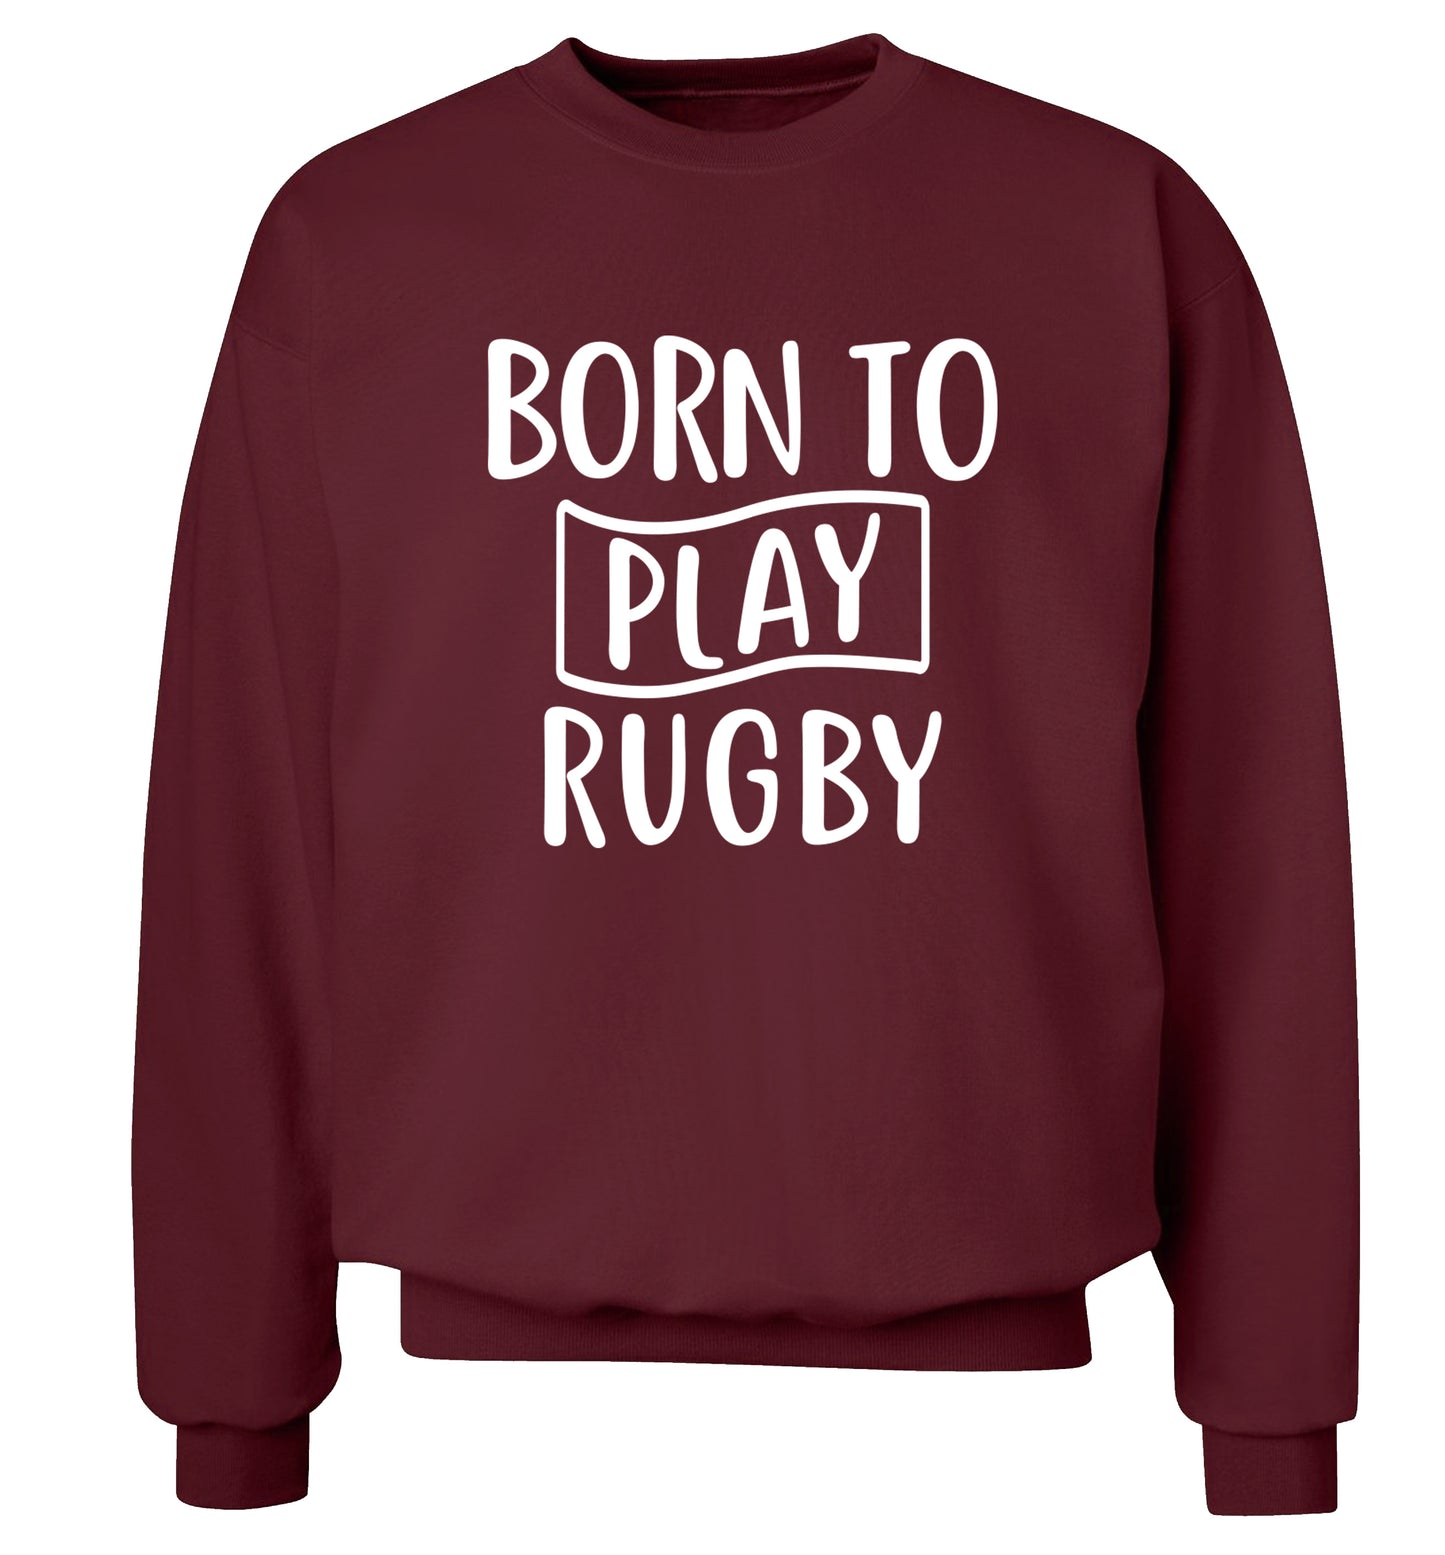 Born to play rugby Adult's unisex maroon Sweater 2XL